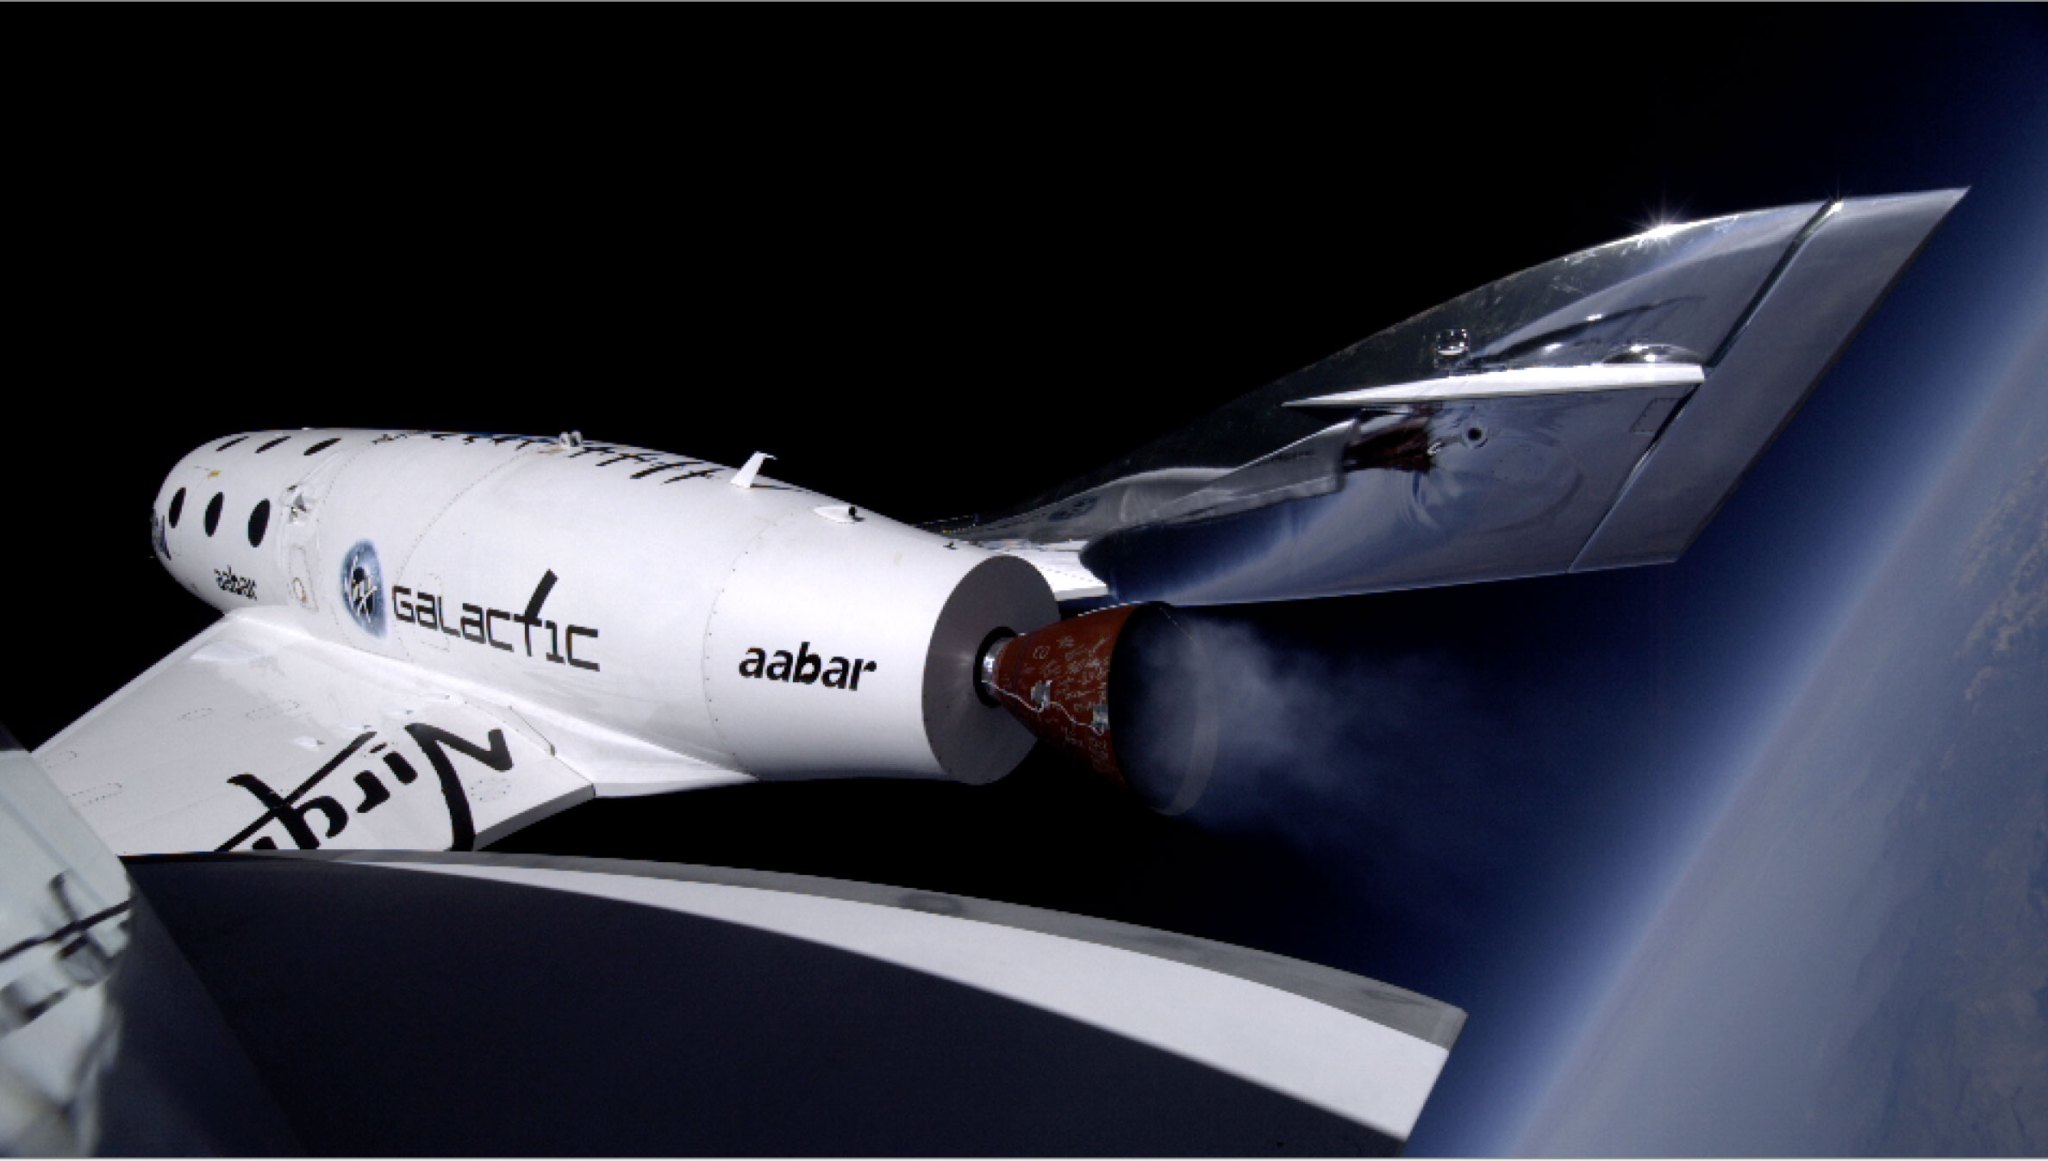 A camera mounted atop the left vertical fin of Virgin Galactic / Scaled Composites SpaceShipTwo captures the vehicle gliding through the upper atmosphere after its rocket engine is shut down during a 2013 test flight. The Earth's horizon can be seen at lower right.